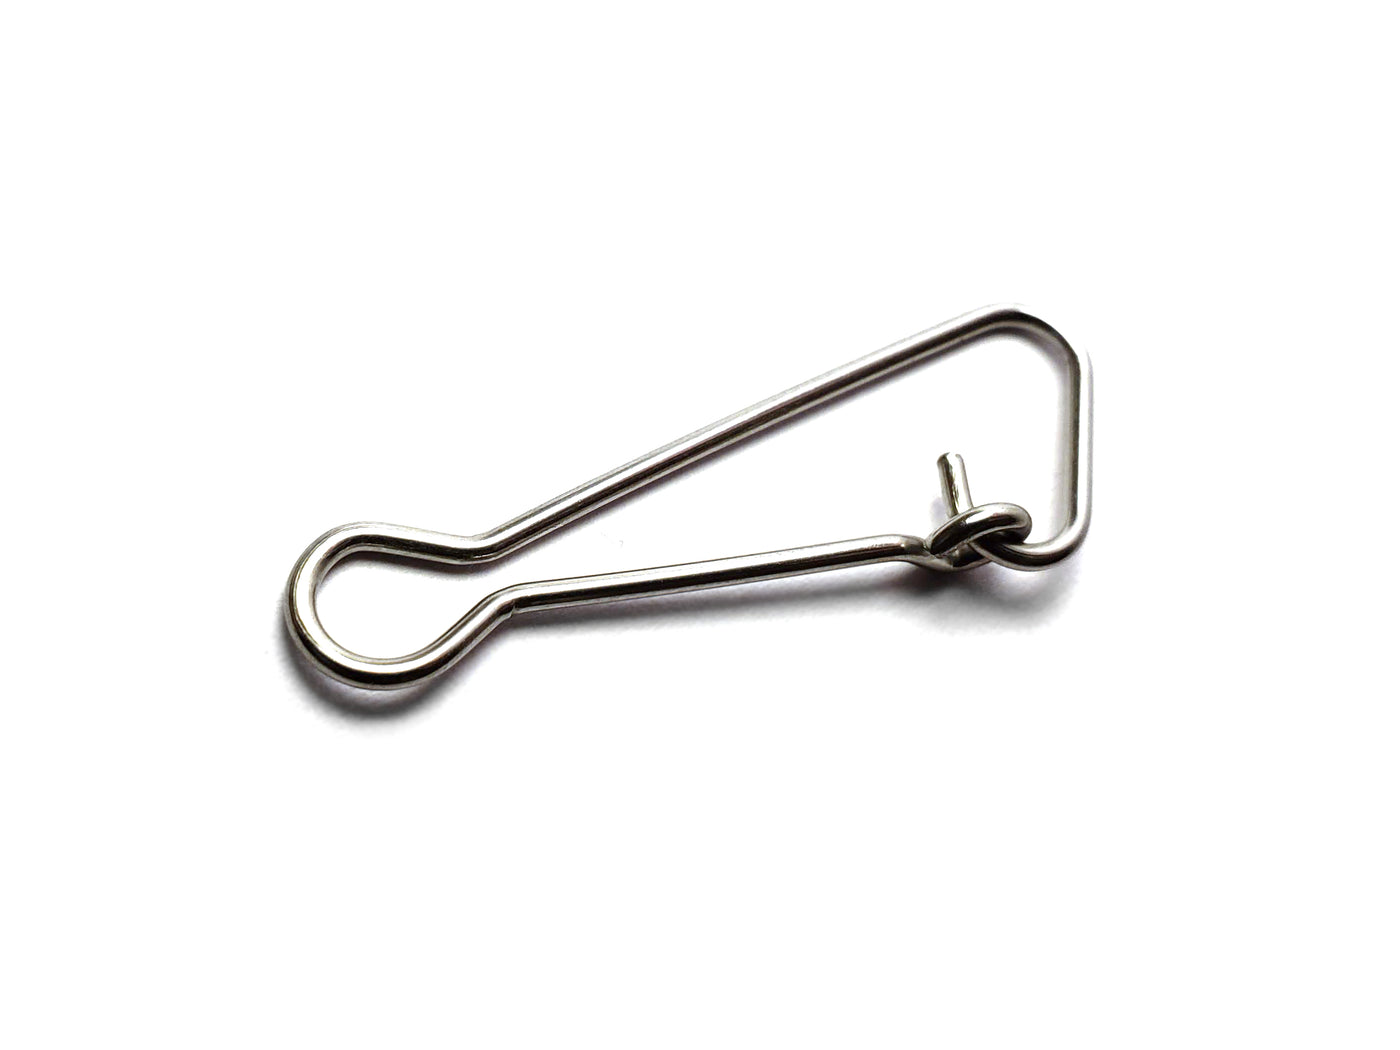 Metal clip on a white background